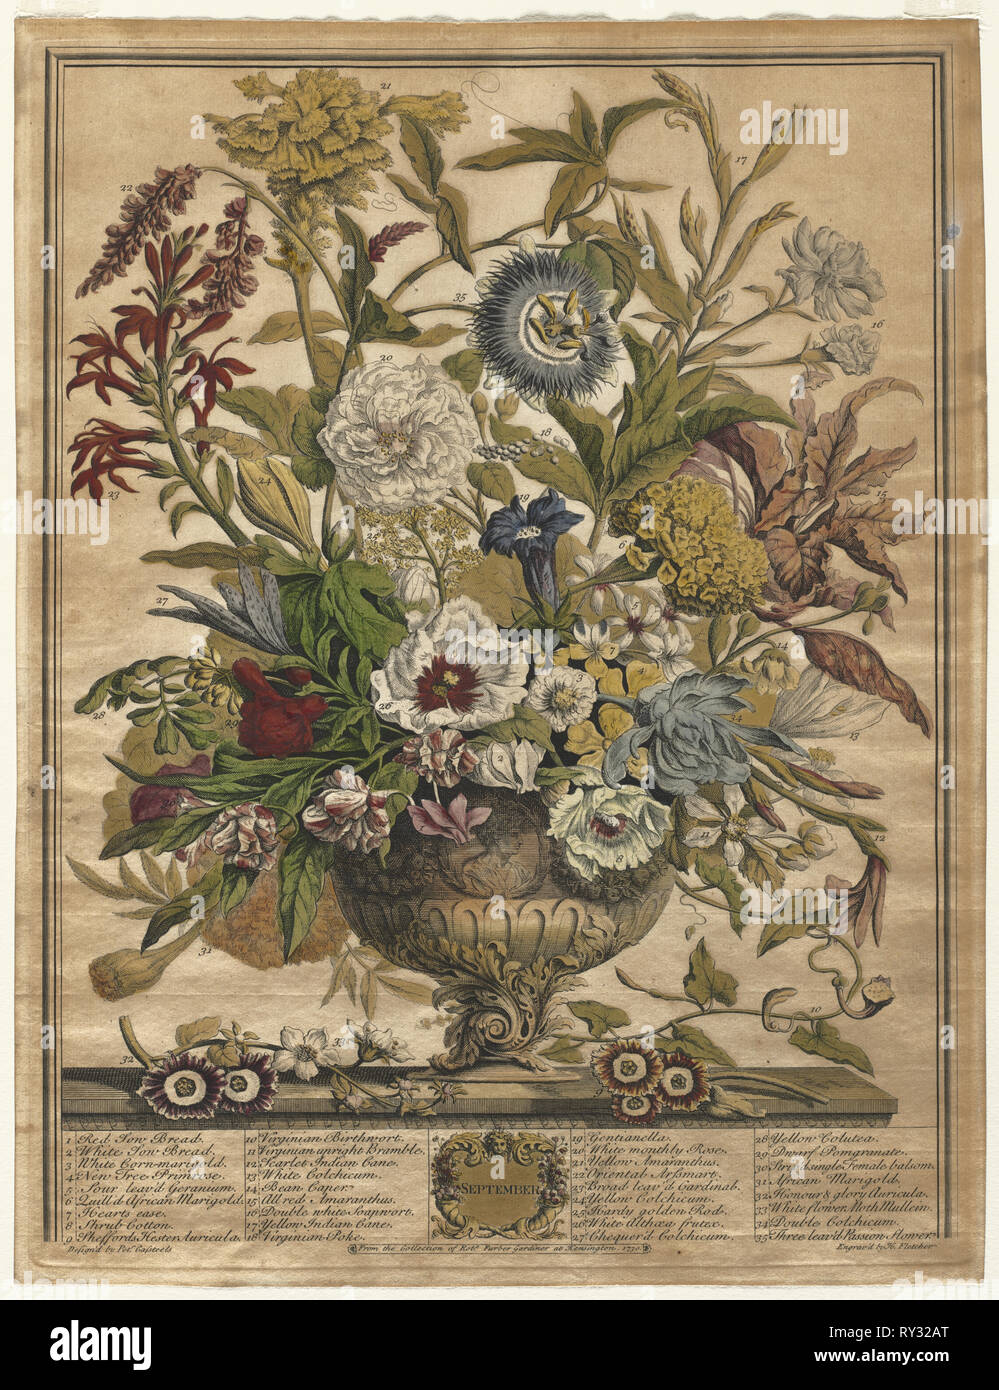 Twelve Months of Flowers:  September, 1730. Henry Fletcher (British, active 1715-38). Engraving, hand-colored; sheet: 42.2 x 32.4 cm (16 5/8 x 12 3/4 in.); platemark: 40.9 x 31.4 cm (16 1/8 x 12 3/8 in Stock Photo